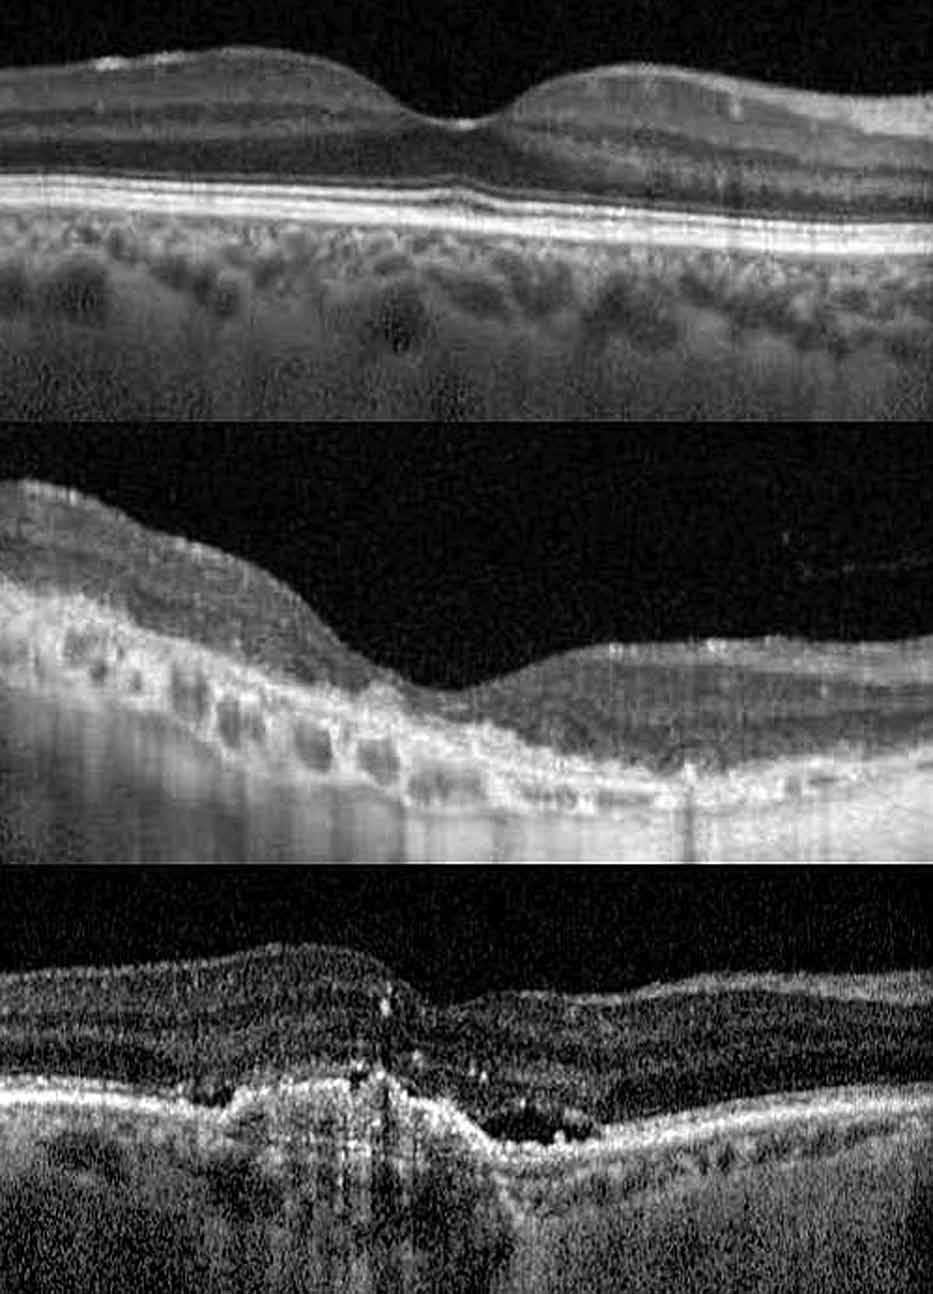 Figure 1. Enhanced depth imaging optical coherence tomography scans in a normal eye (upper image), dry type age-related macular degeneration (AMD) (middle image), and wet AMD (lower image).